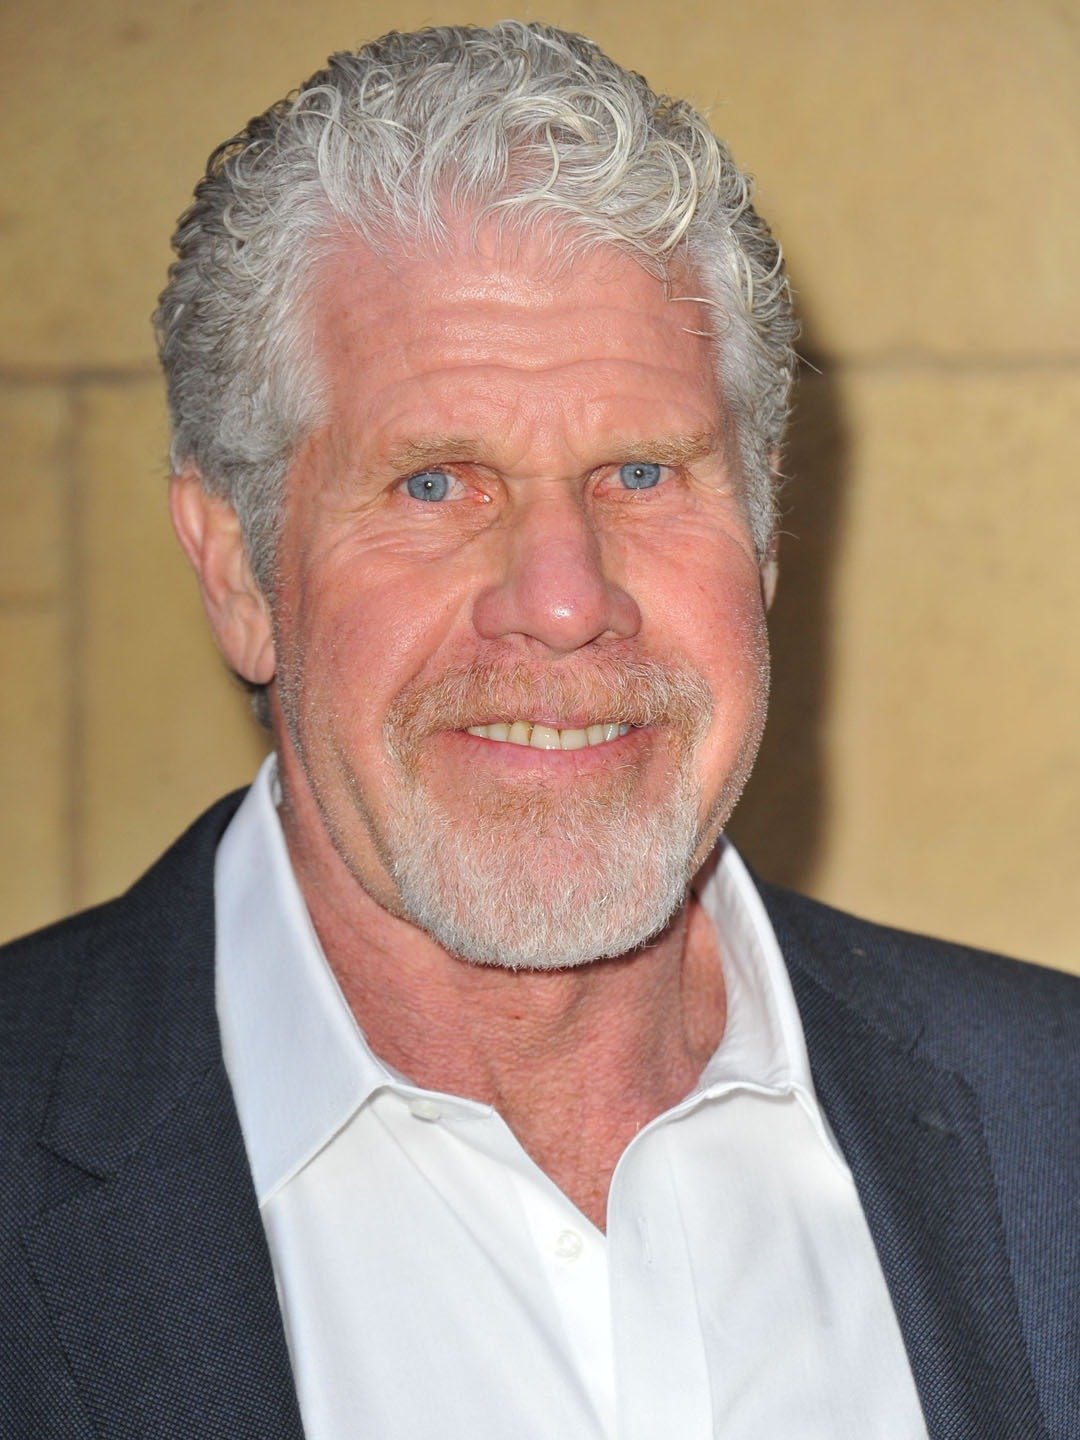 How tall is Ron Perlman?